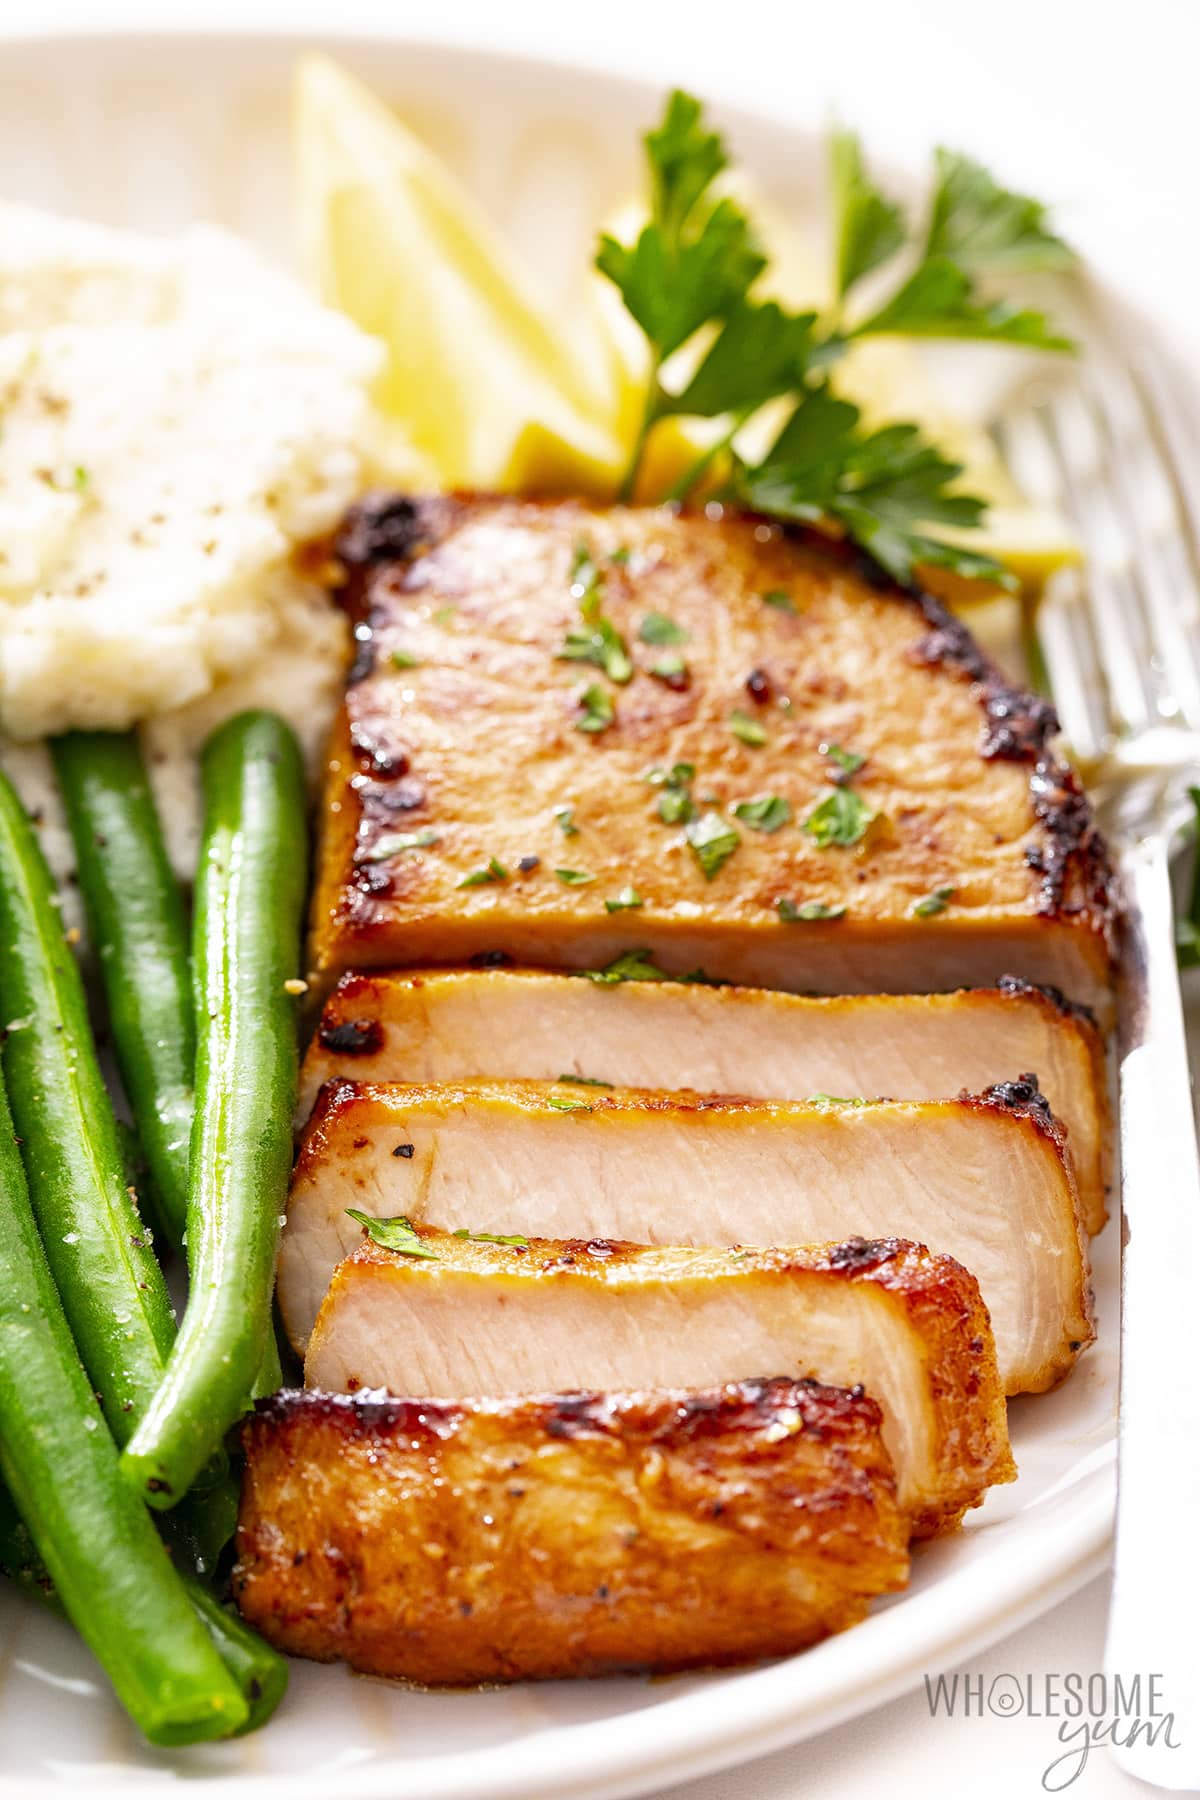 Baked pork chop recipe sliced on a plate, with green beans and mash.